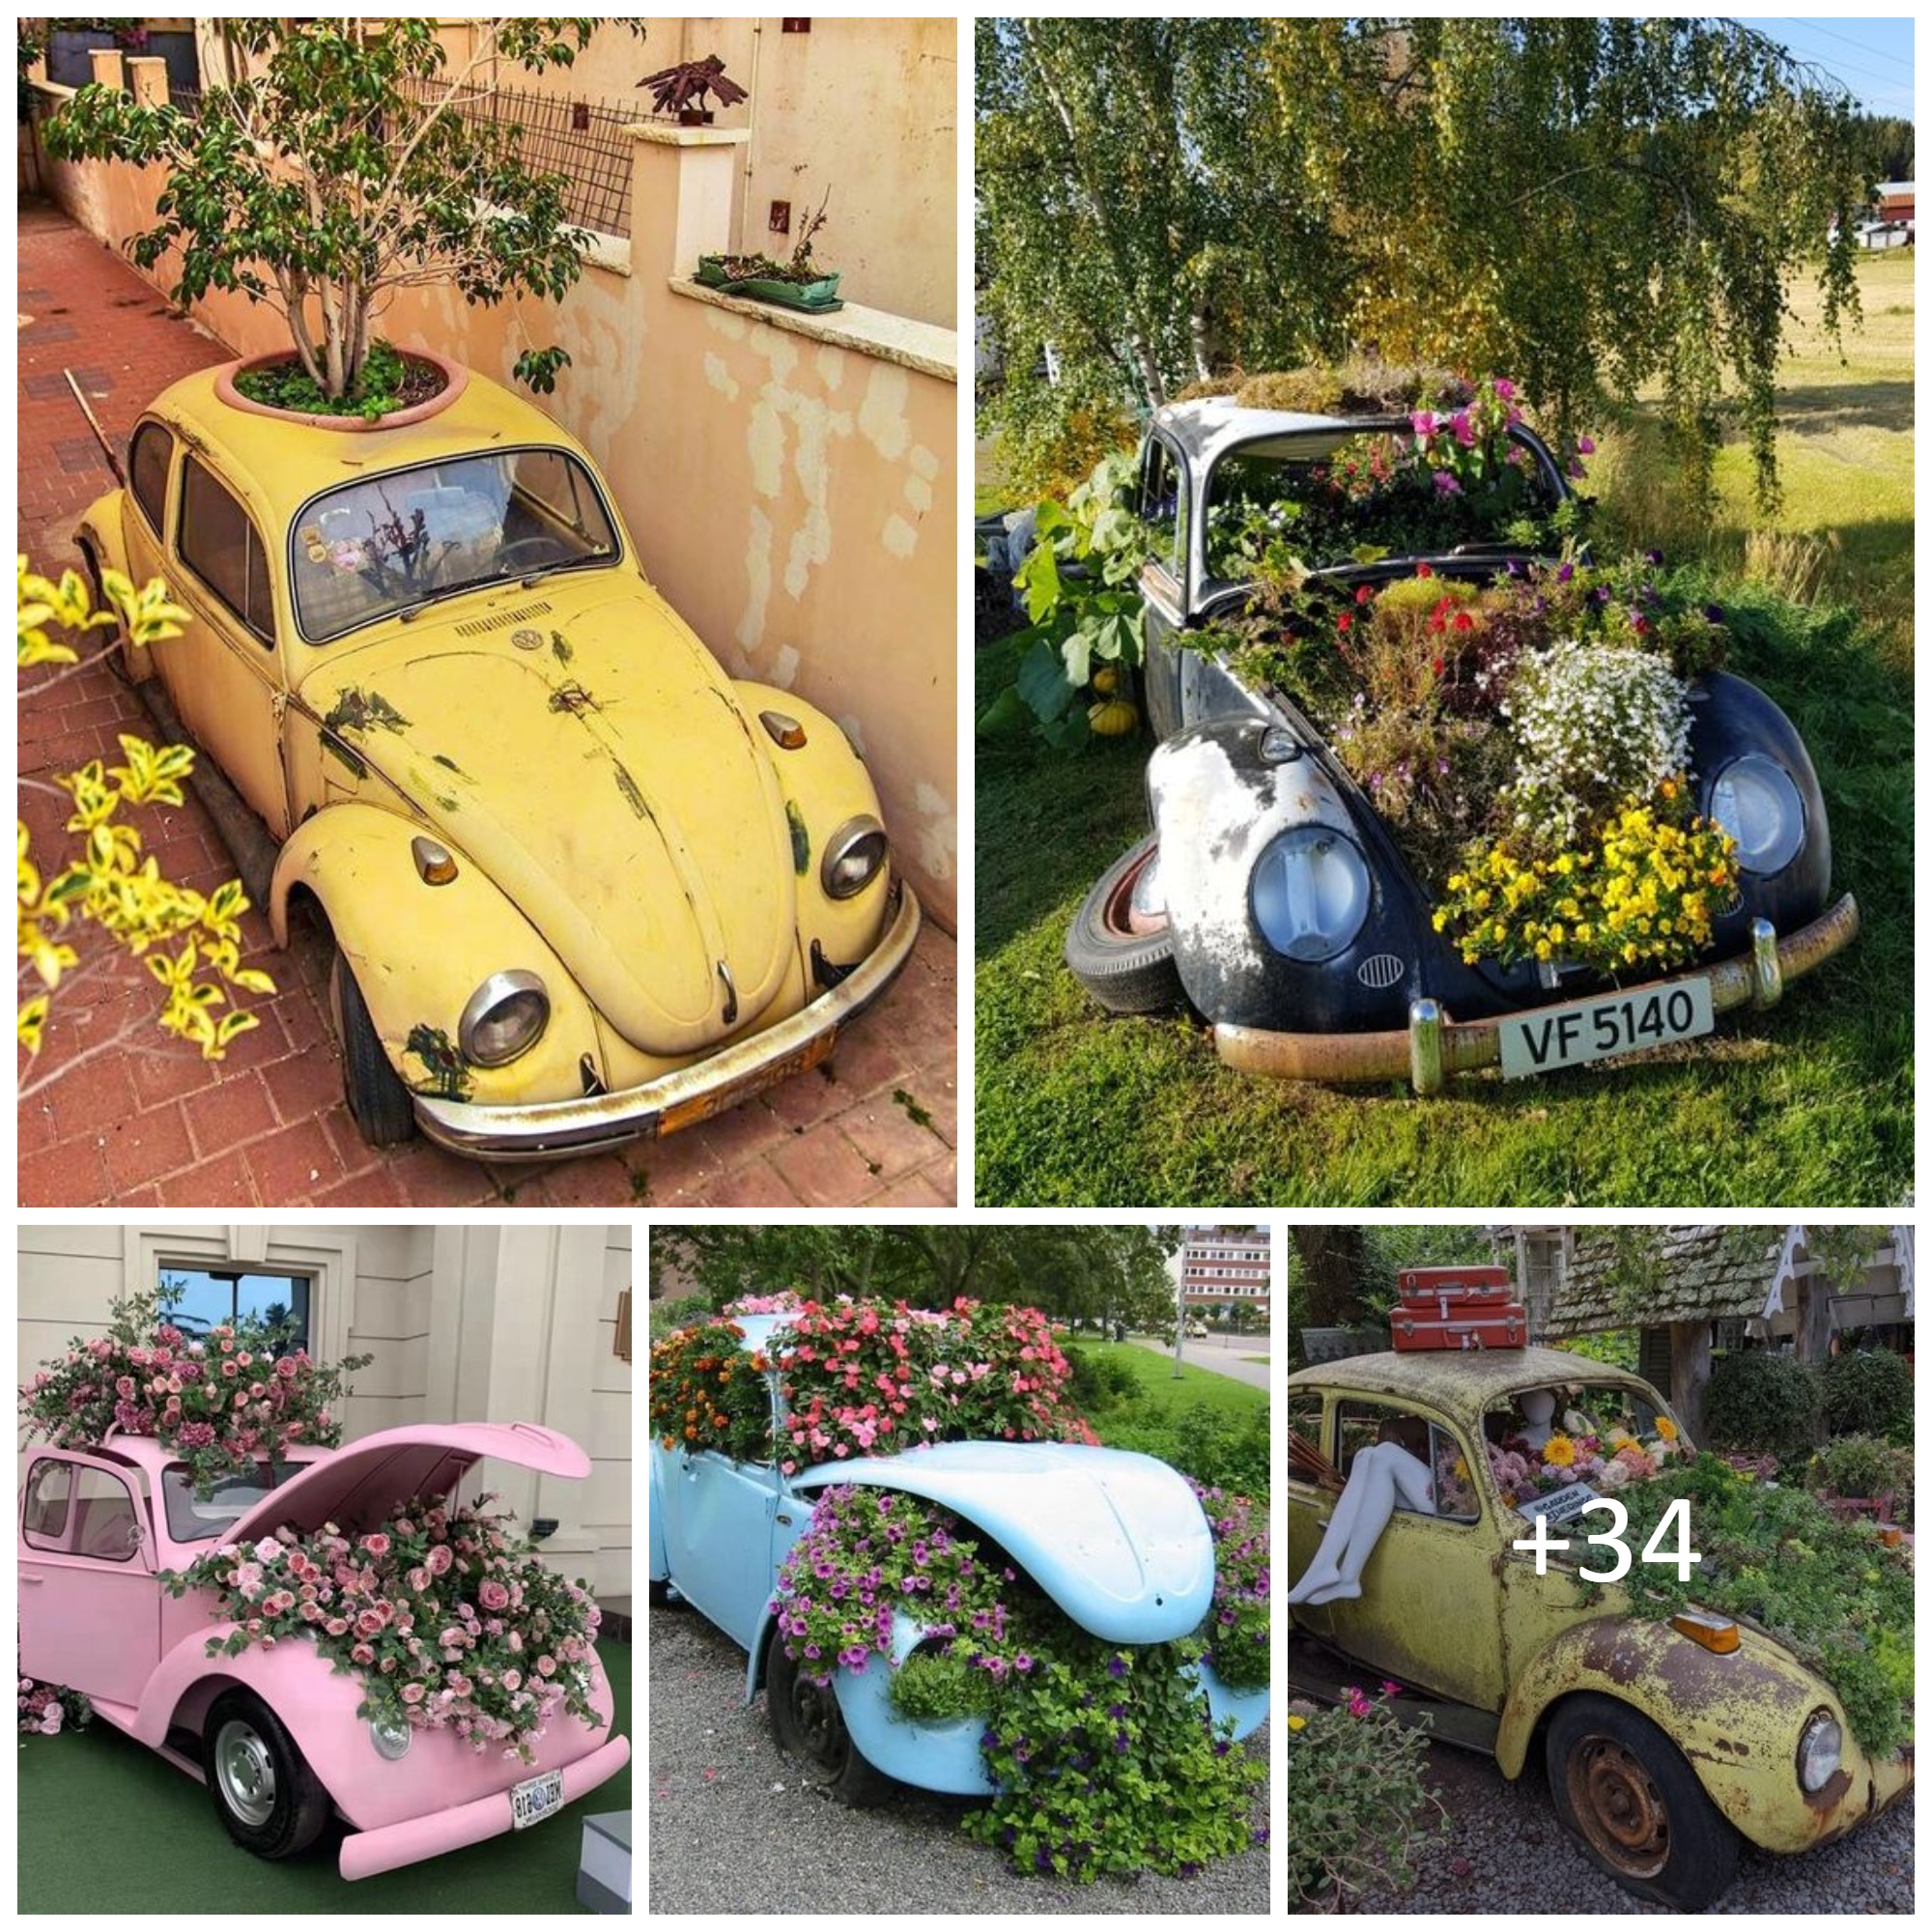 How to make a flower bed from a car with your own hands